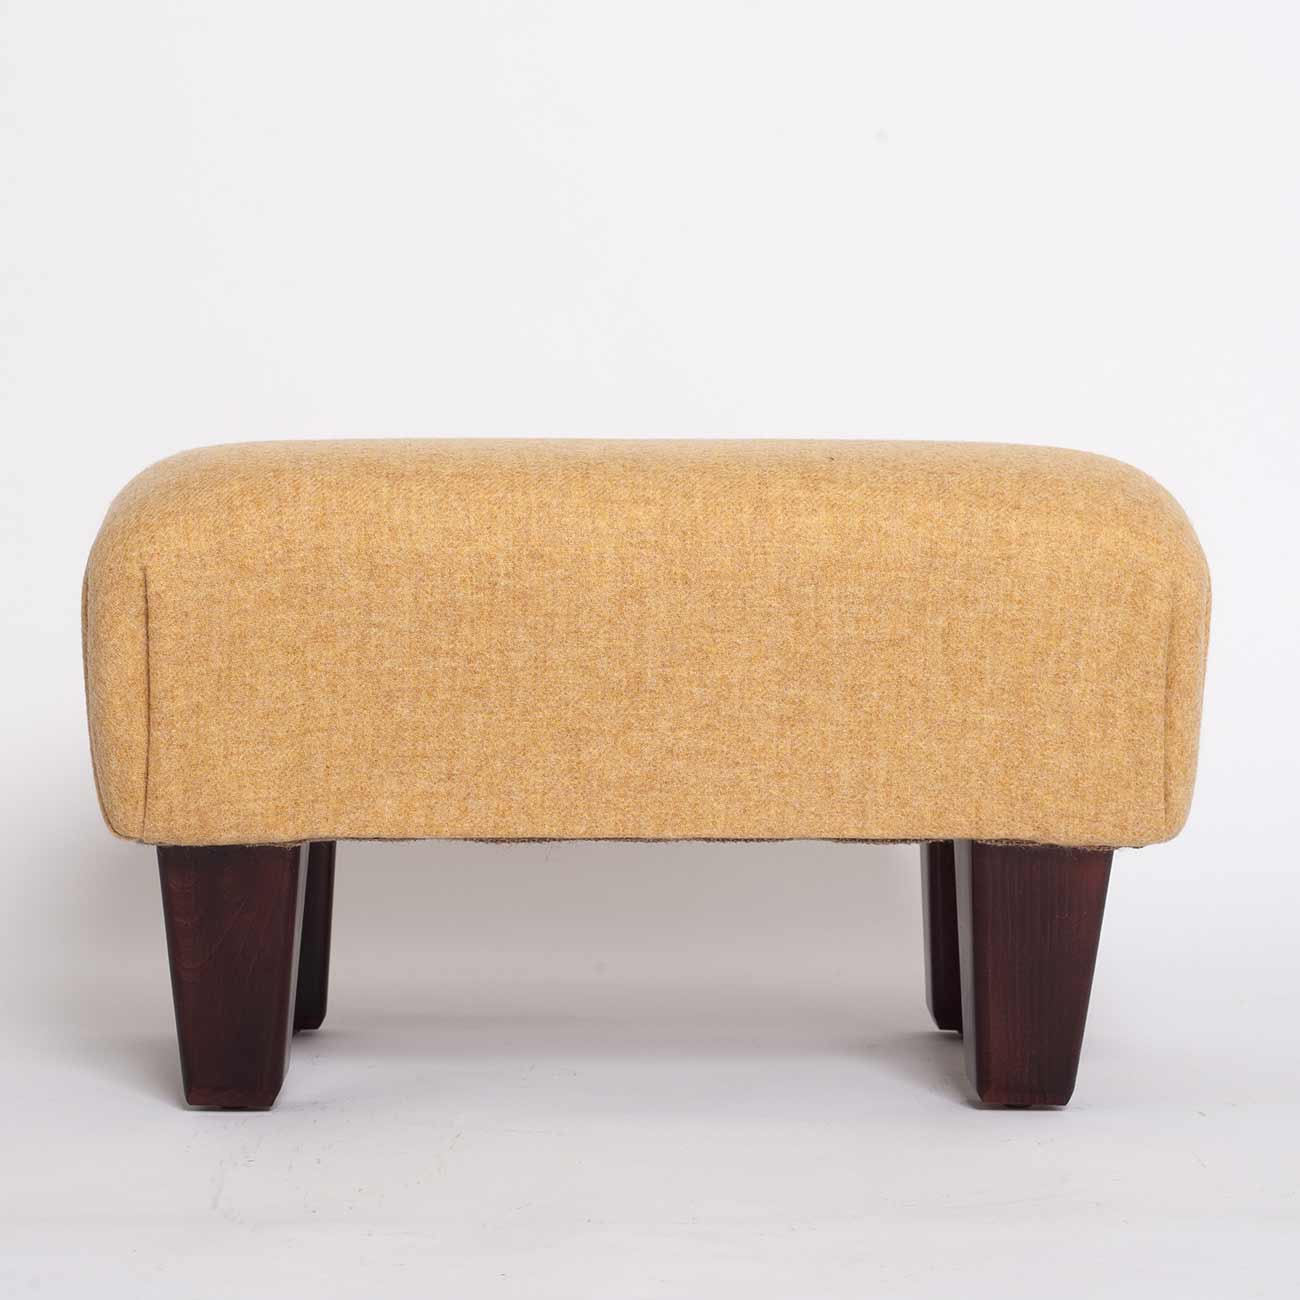 yellow-fabric-footstool4 fabric from JLP